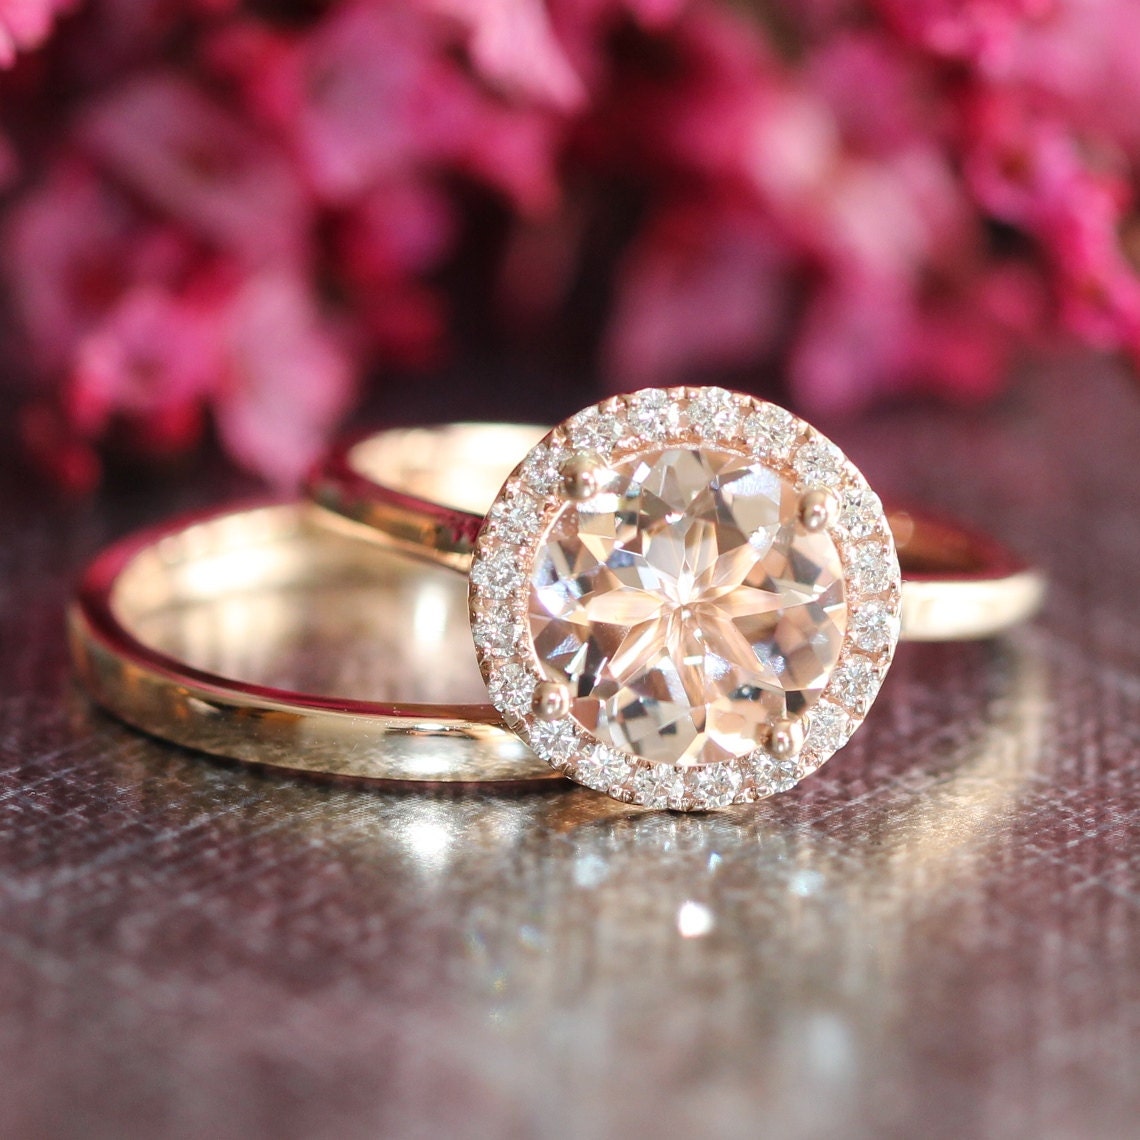 Pink Peach Morganite Engagement Ring Wedding Band by LaMoreDesign